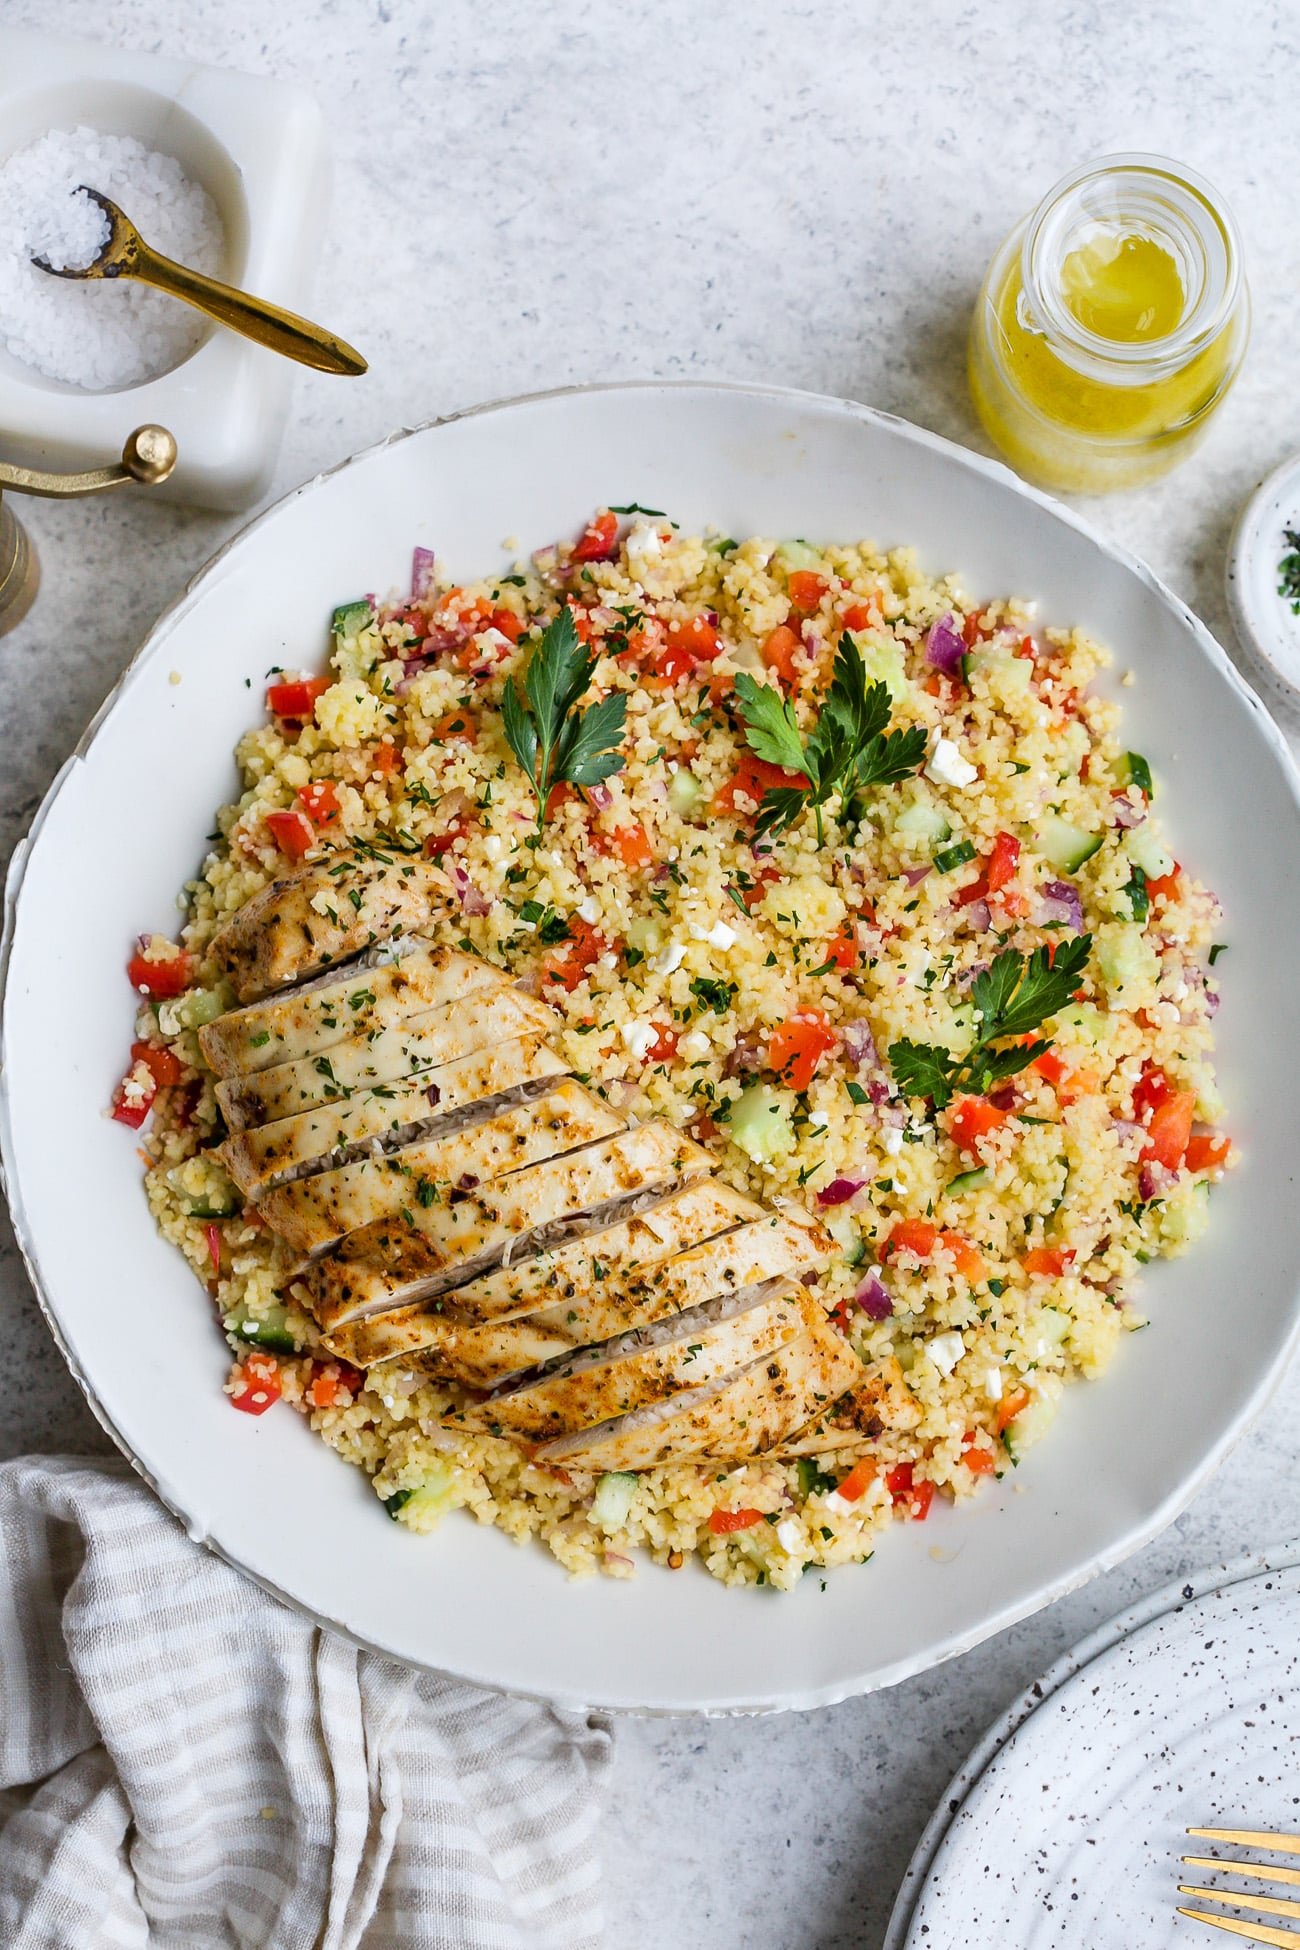 Chicken couscous salad in a large, white serving bowl.